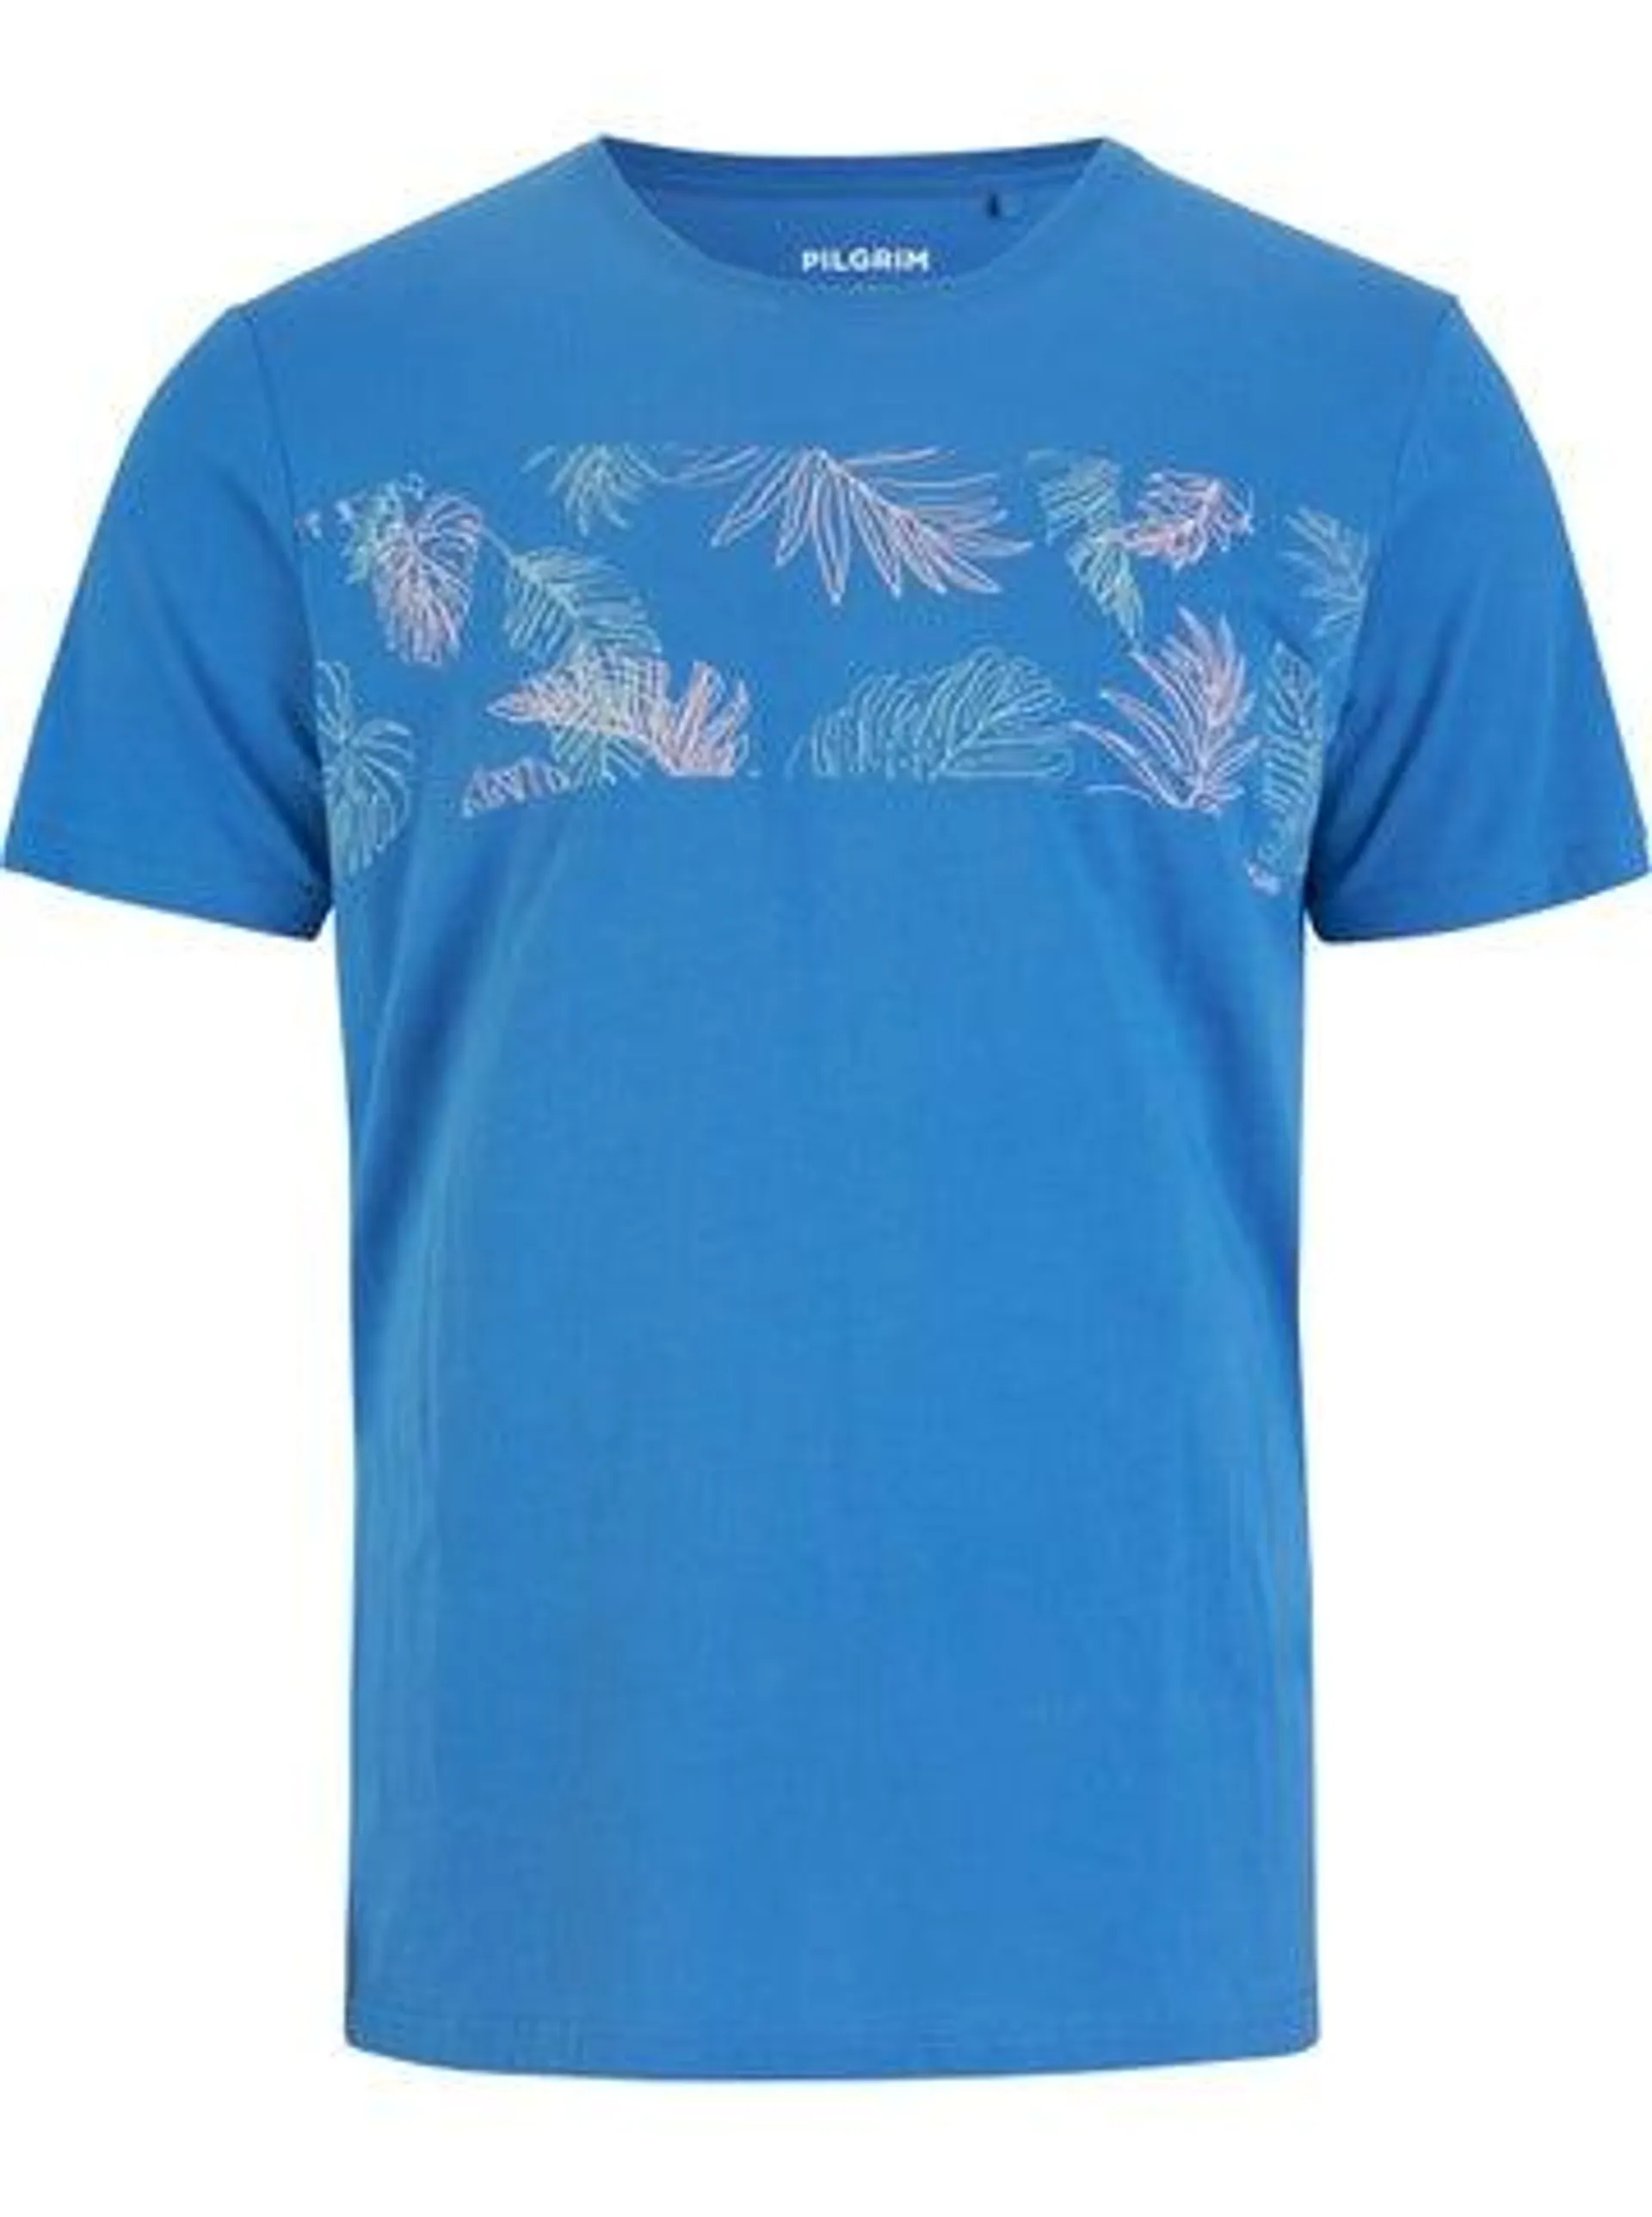 Men's Printed Tee in Bright Blue/tropical Panel